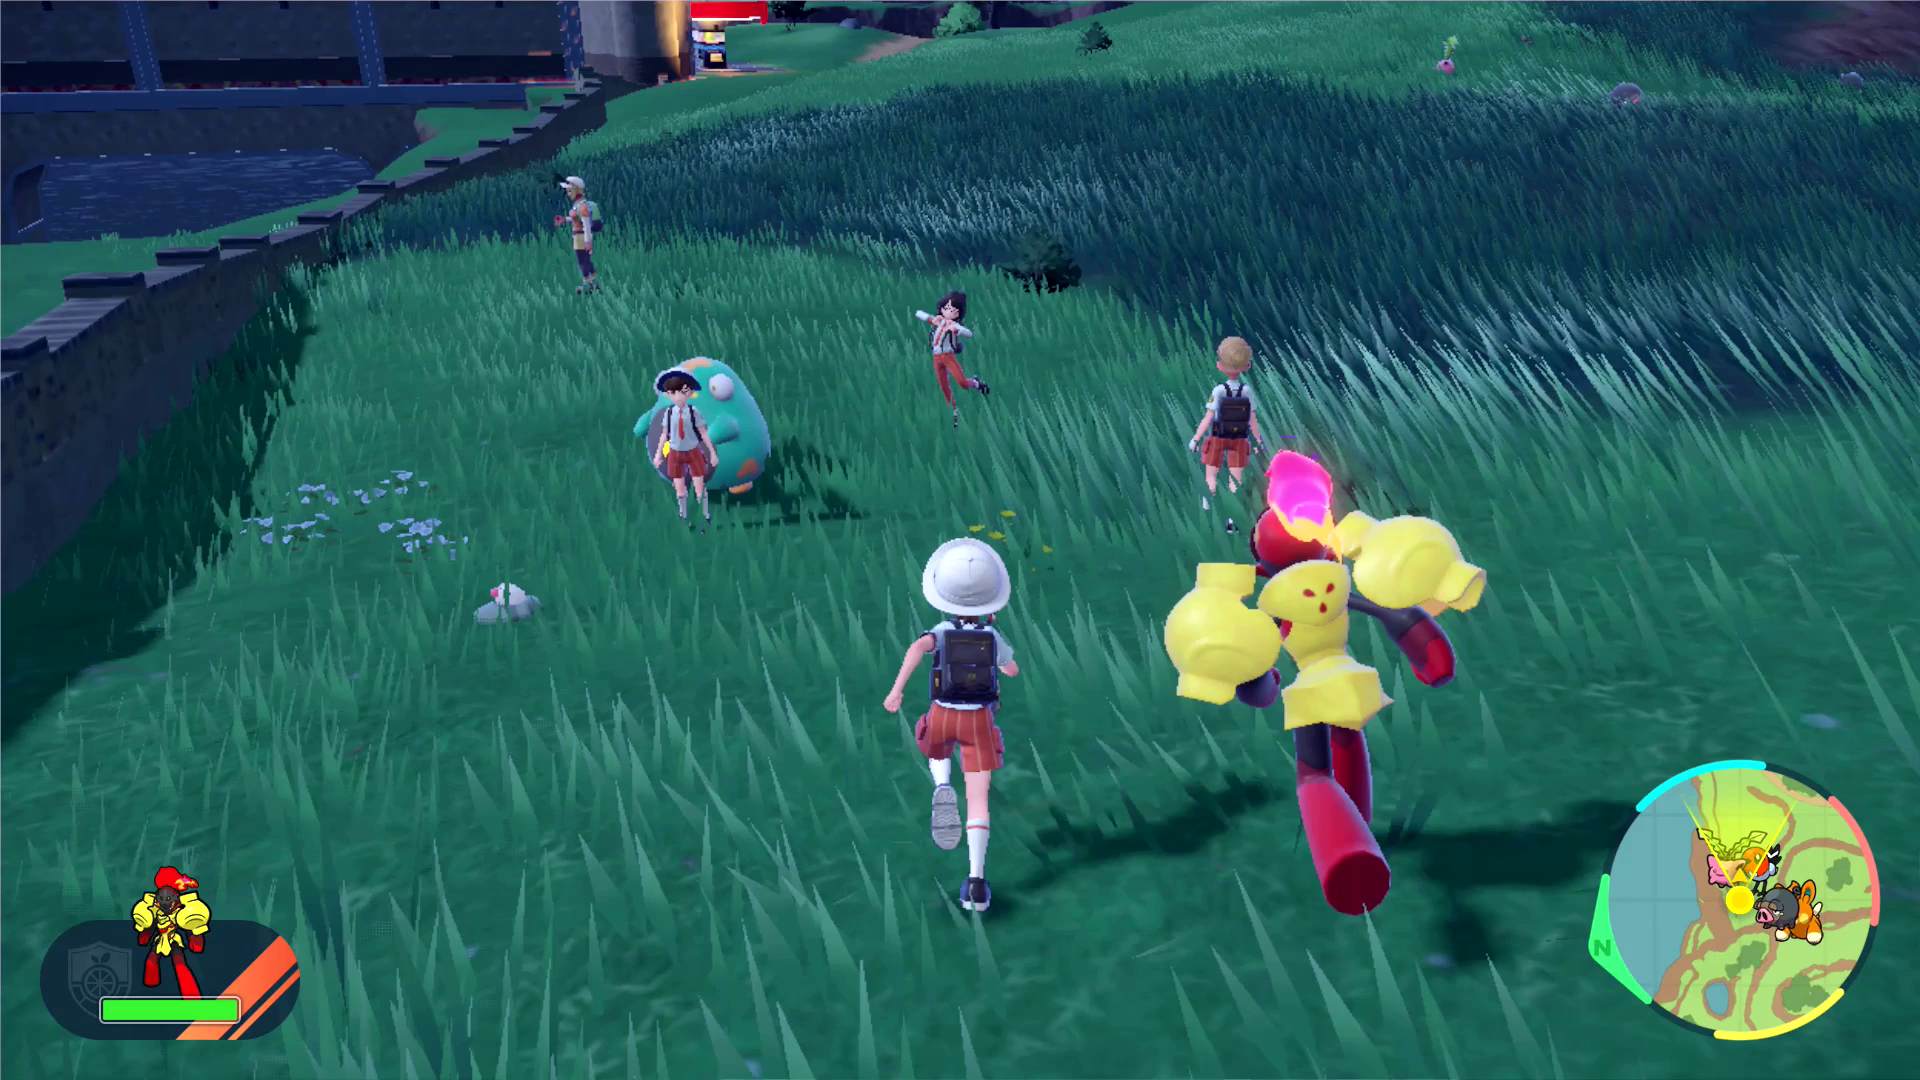 Pokémon Scarlet Violet - running around a field with three other trainers and Pokémon like Armorage